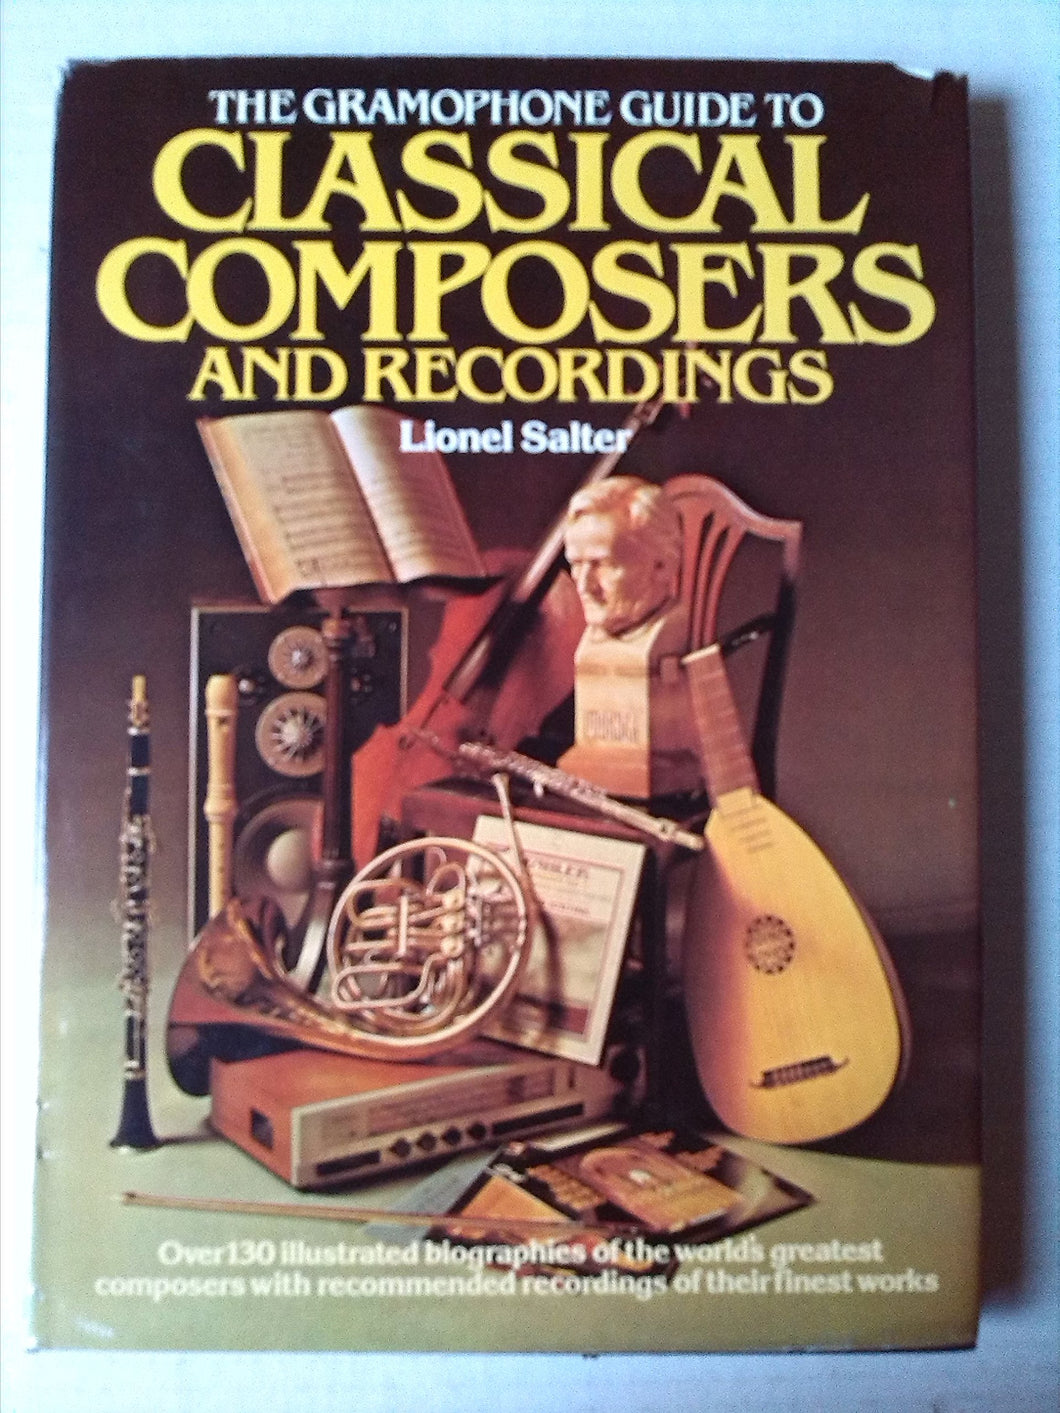 Gramophone Guide to Classical Composers and Recordings (A Salamander book) Salter, Lionel